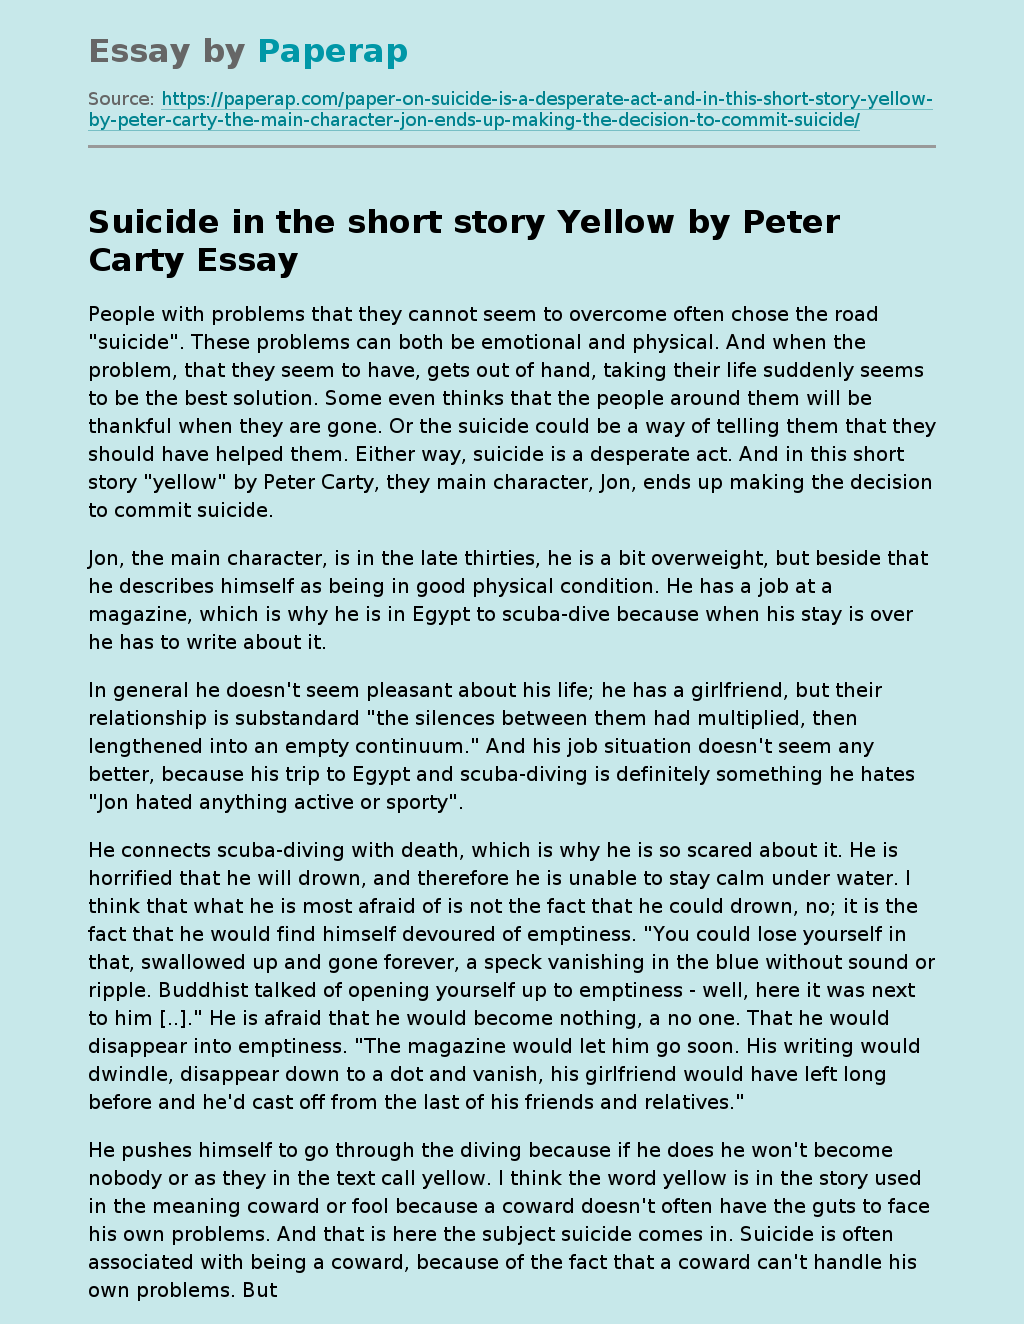 Suicide in the short story Yellow by Peter Carty